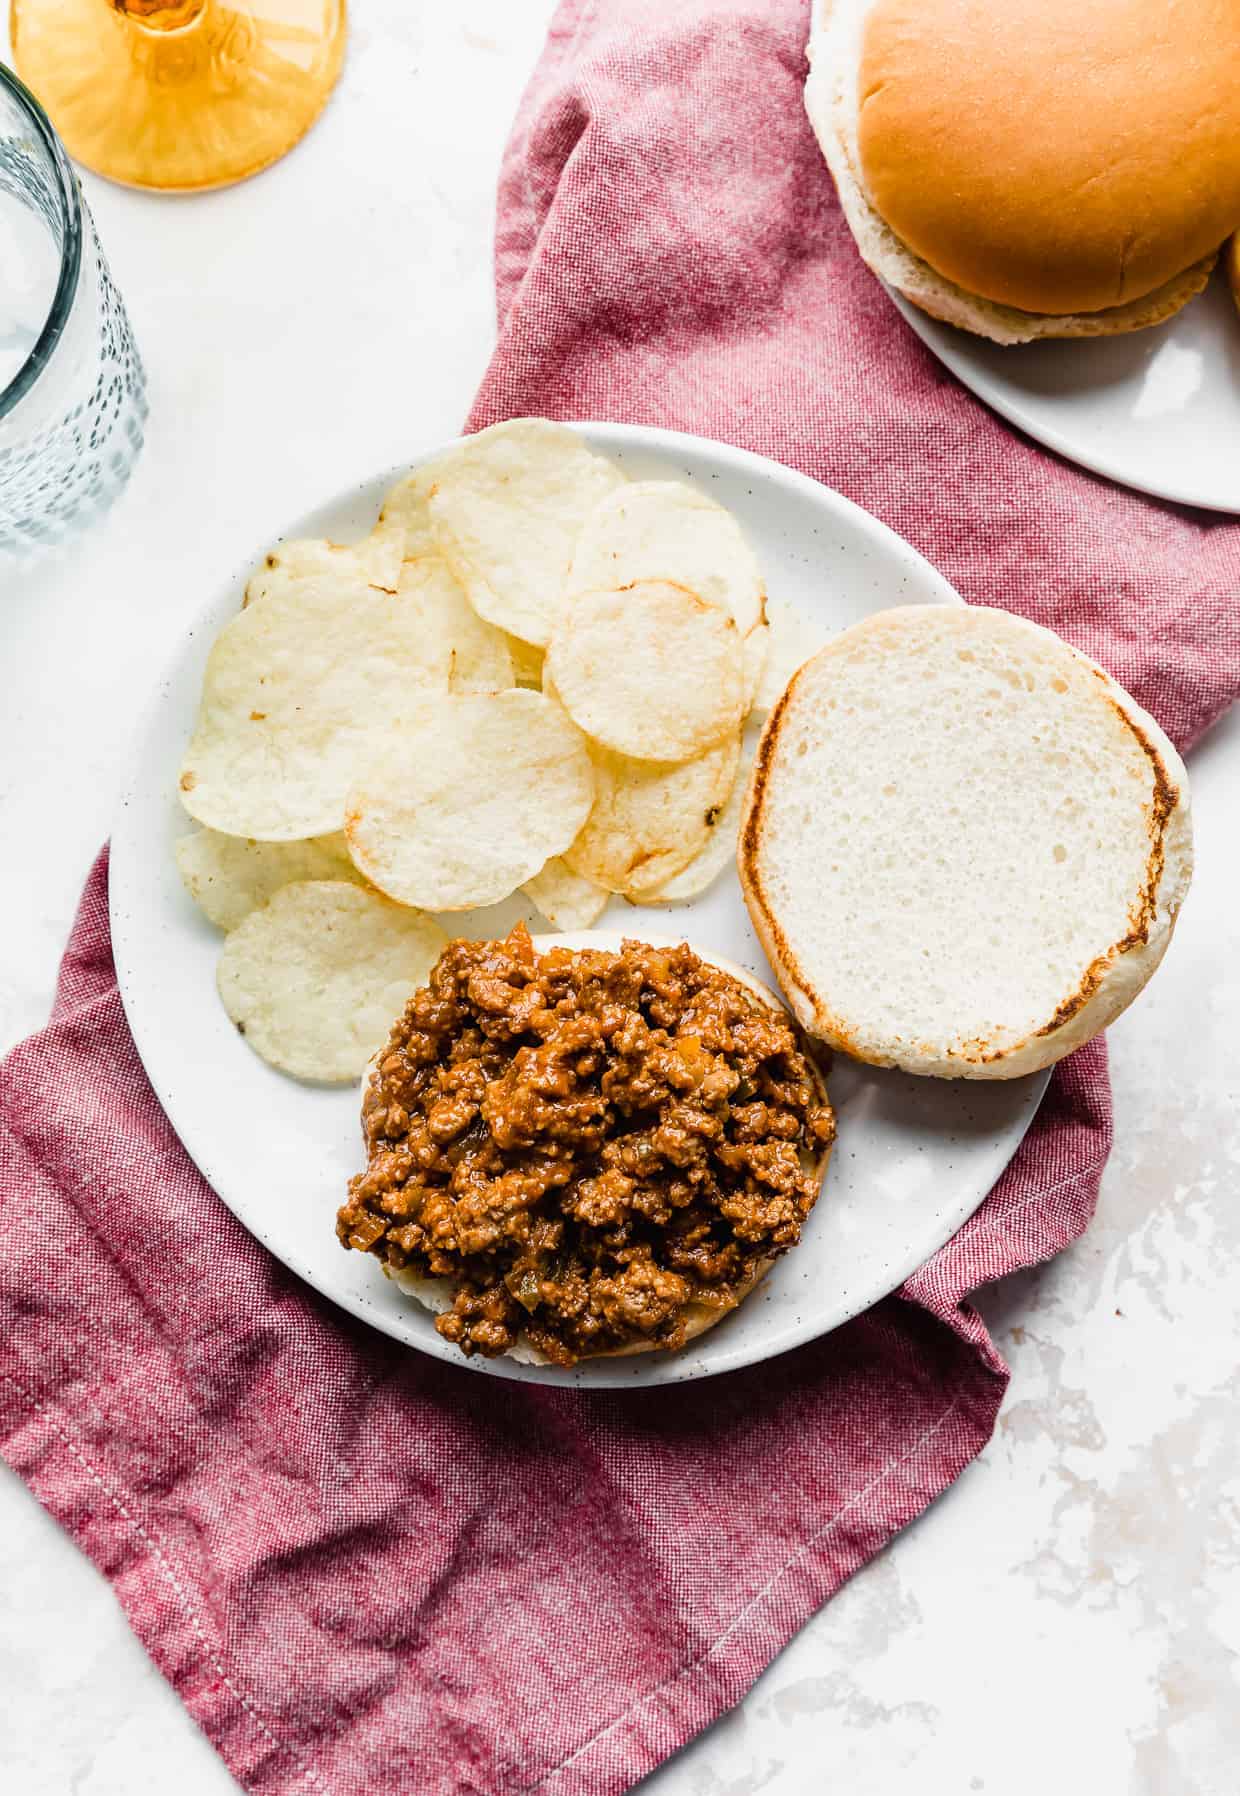 A hamburger bun on a white plate, with one half of the bun loaded with homemade sloppy Joe mix.